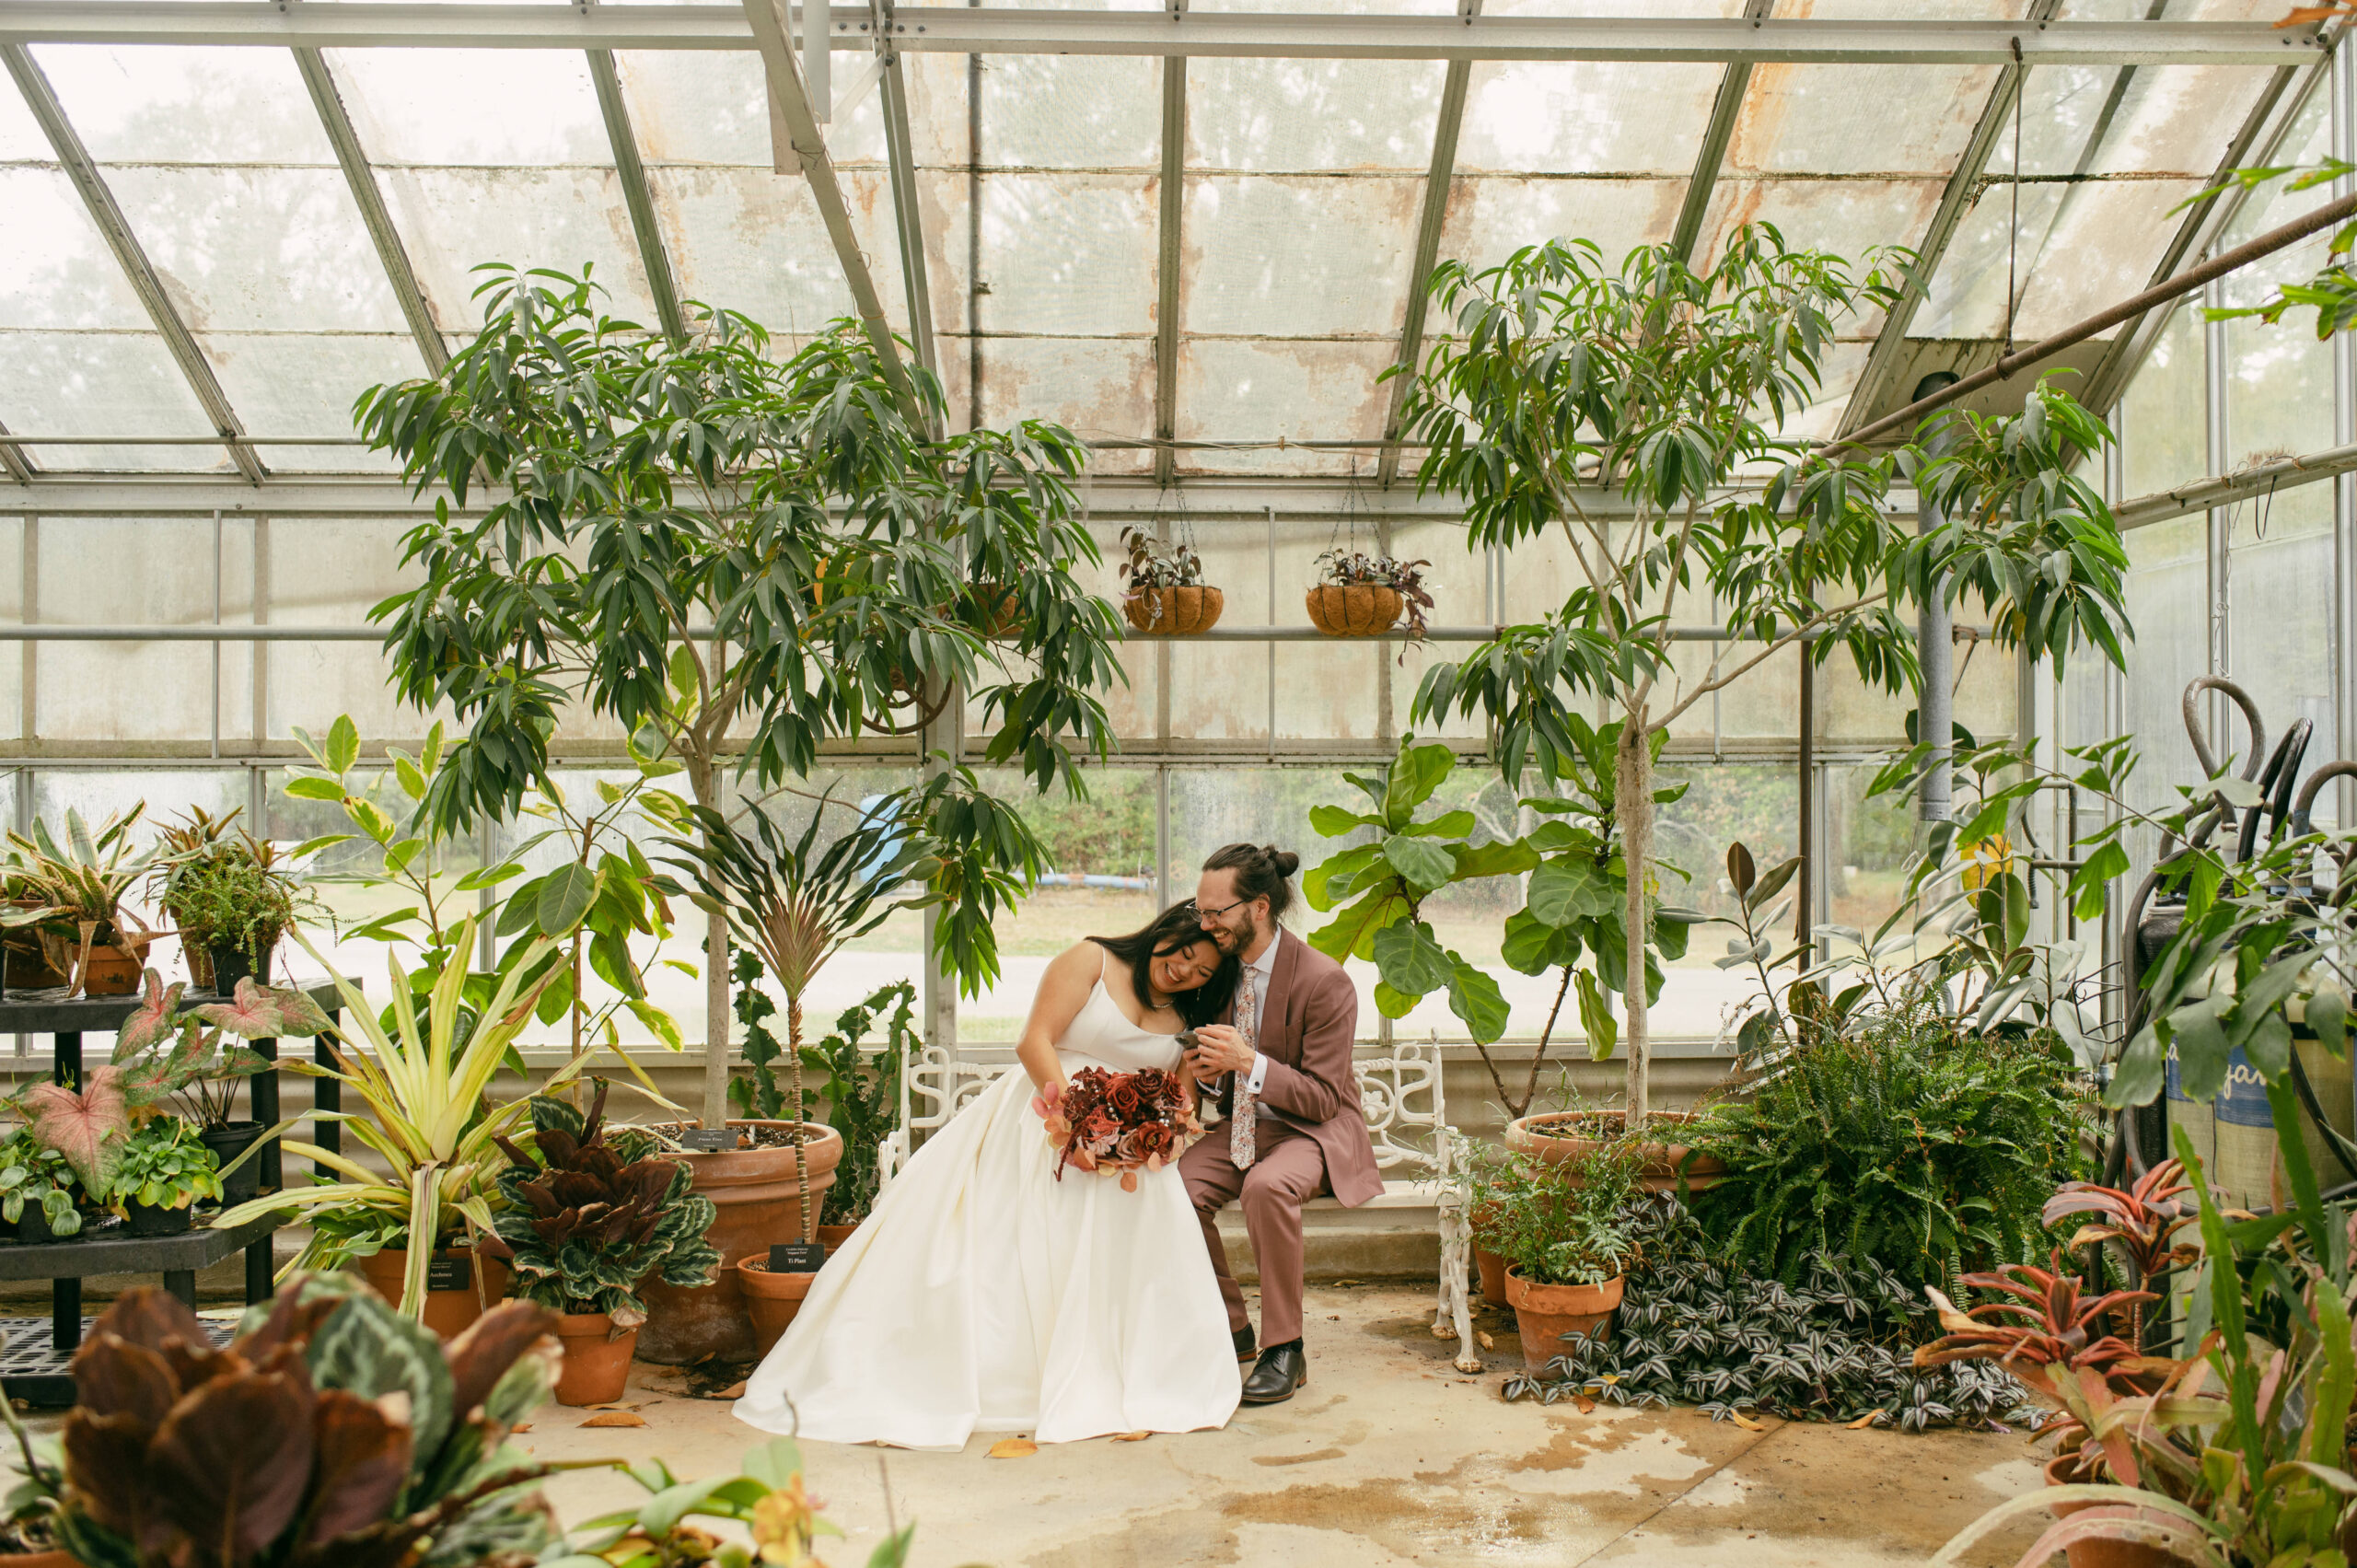 A couple reads private vows during their first look in a greenhouse.